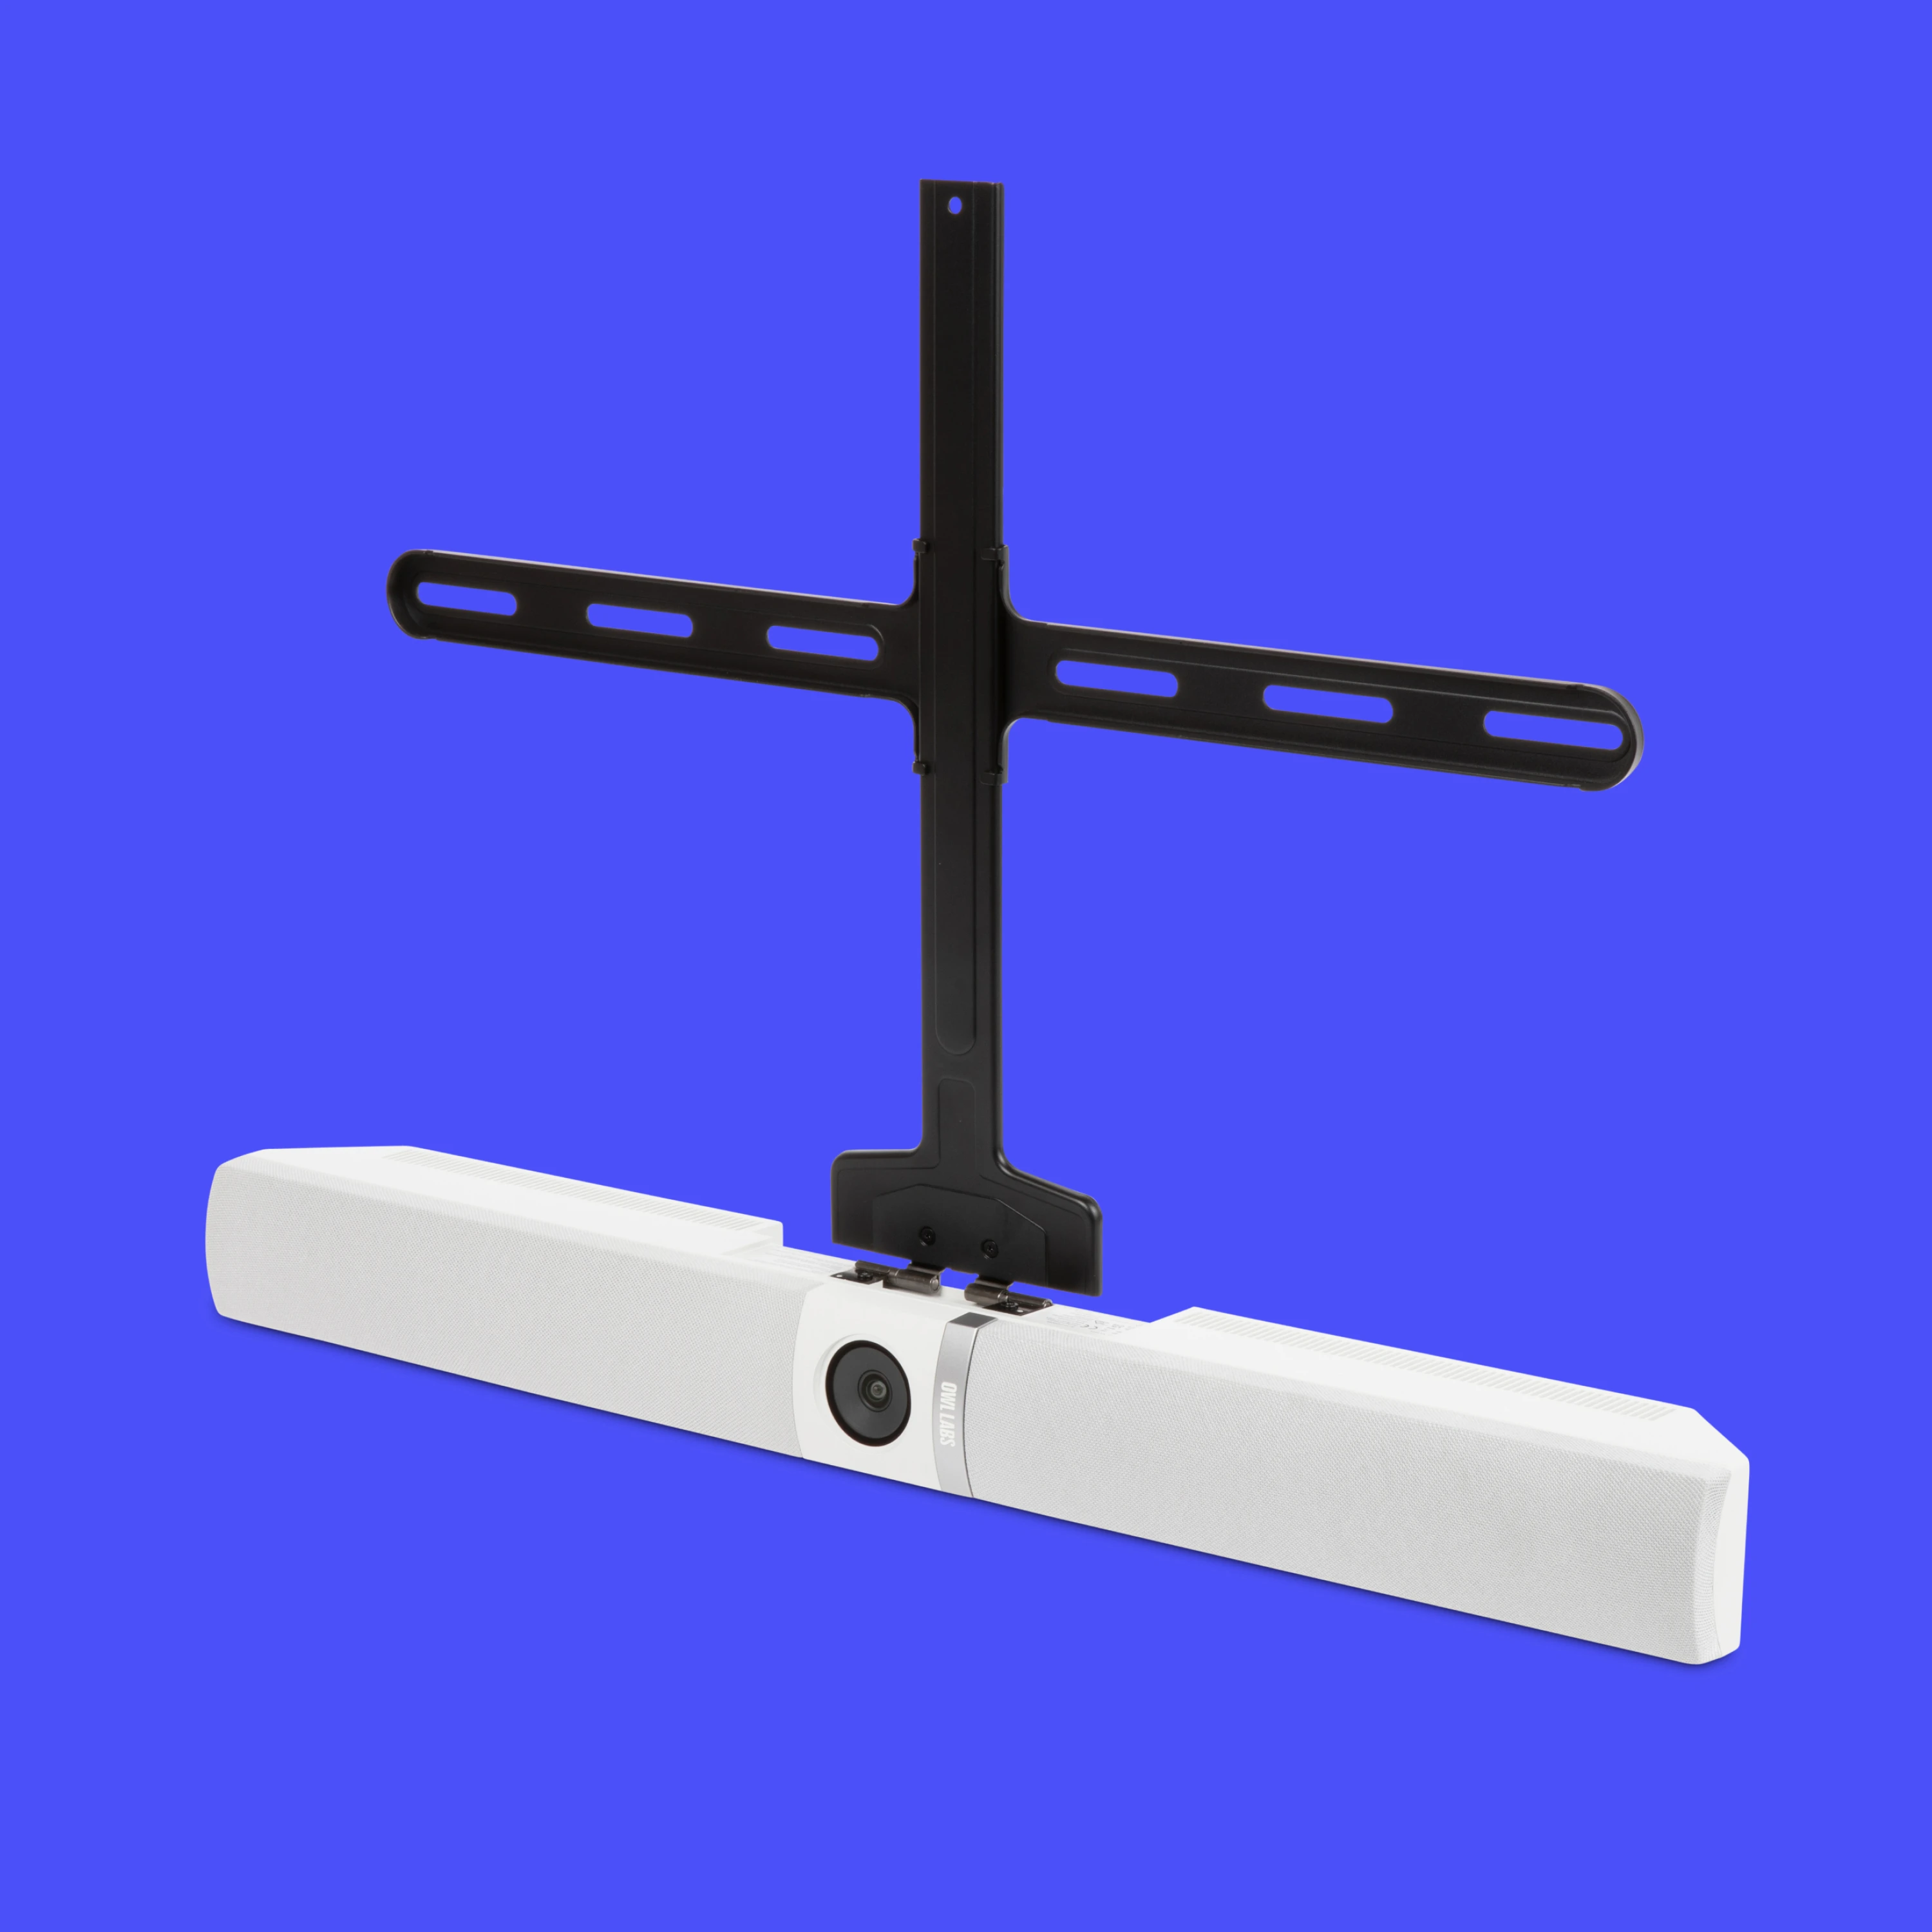 product | accessory | tv mount | front with bar purple bkgd